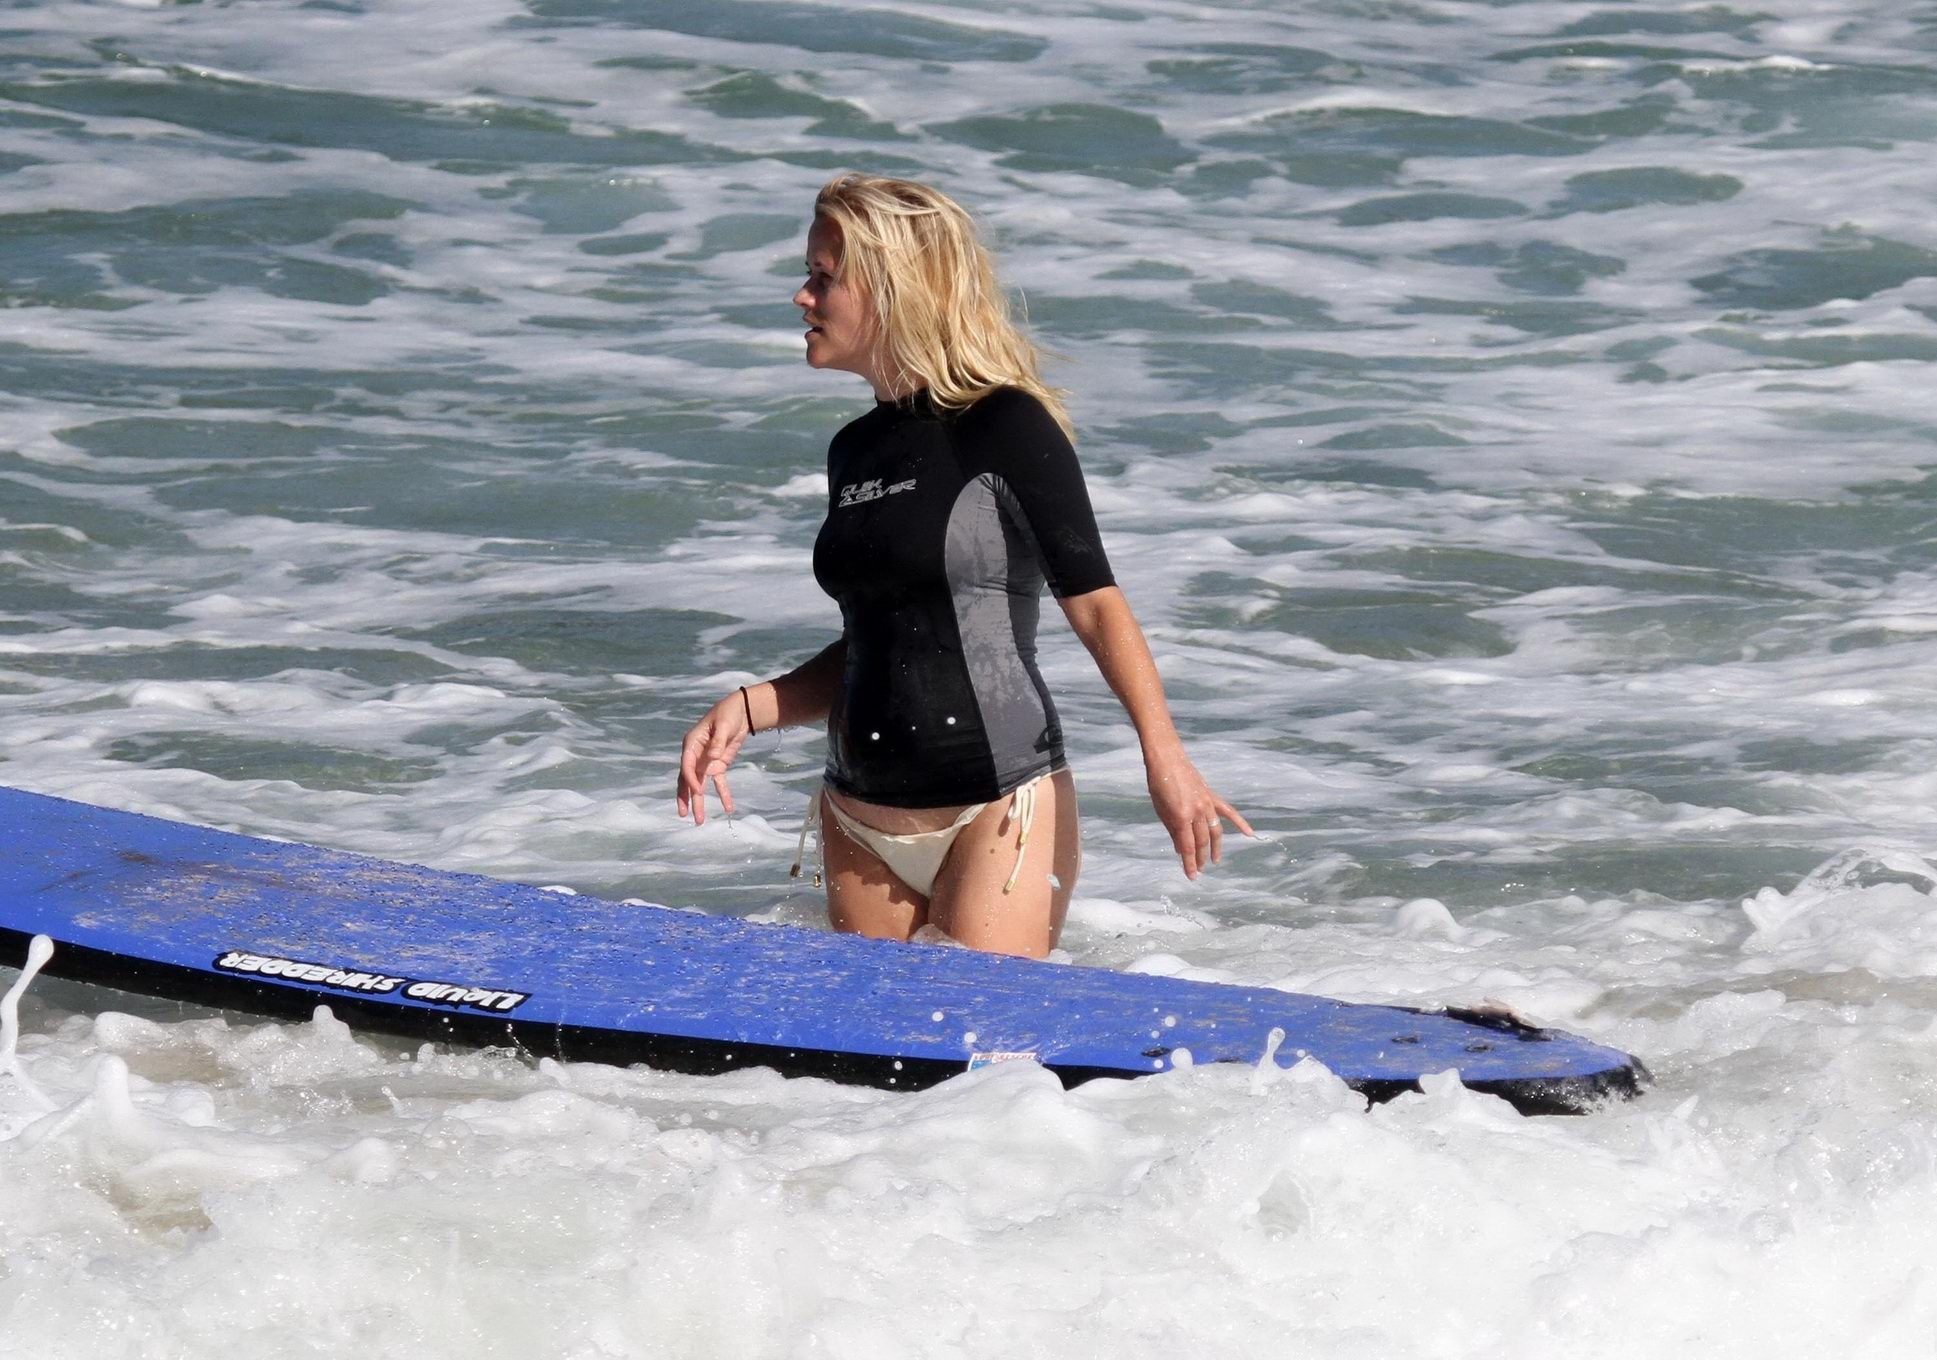 Reese Witherspoon mostra il suo culo mentre fa surf alle Hawaii
 #75291238